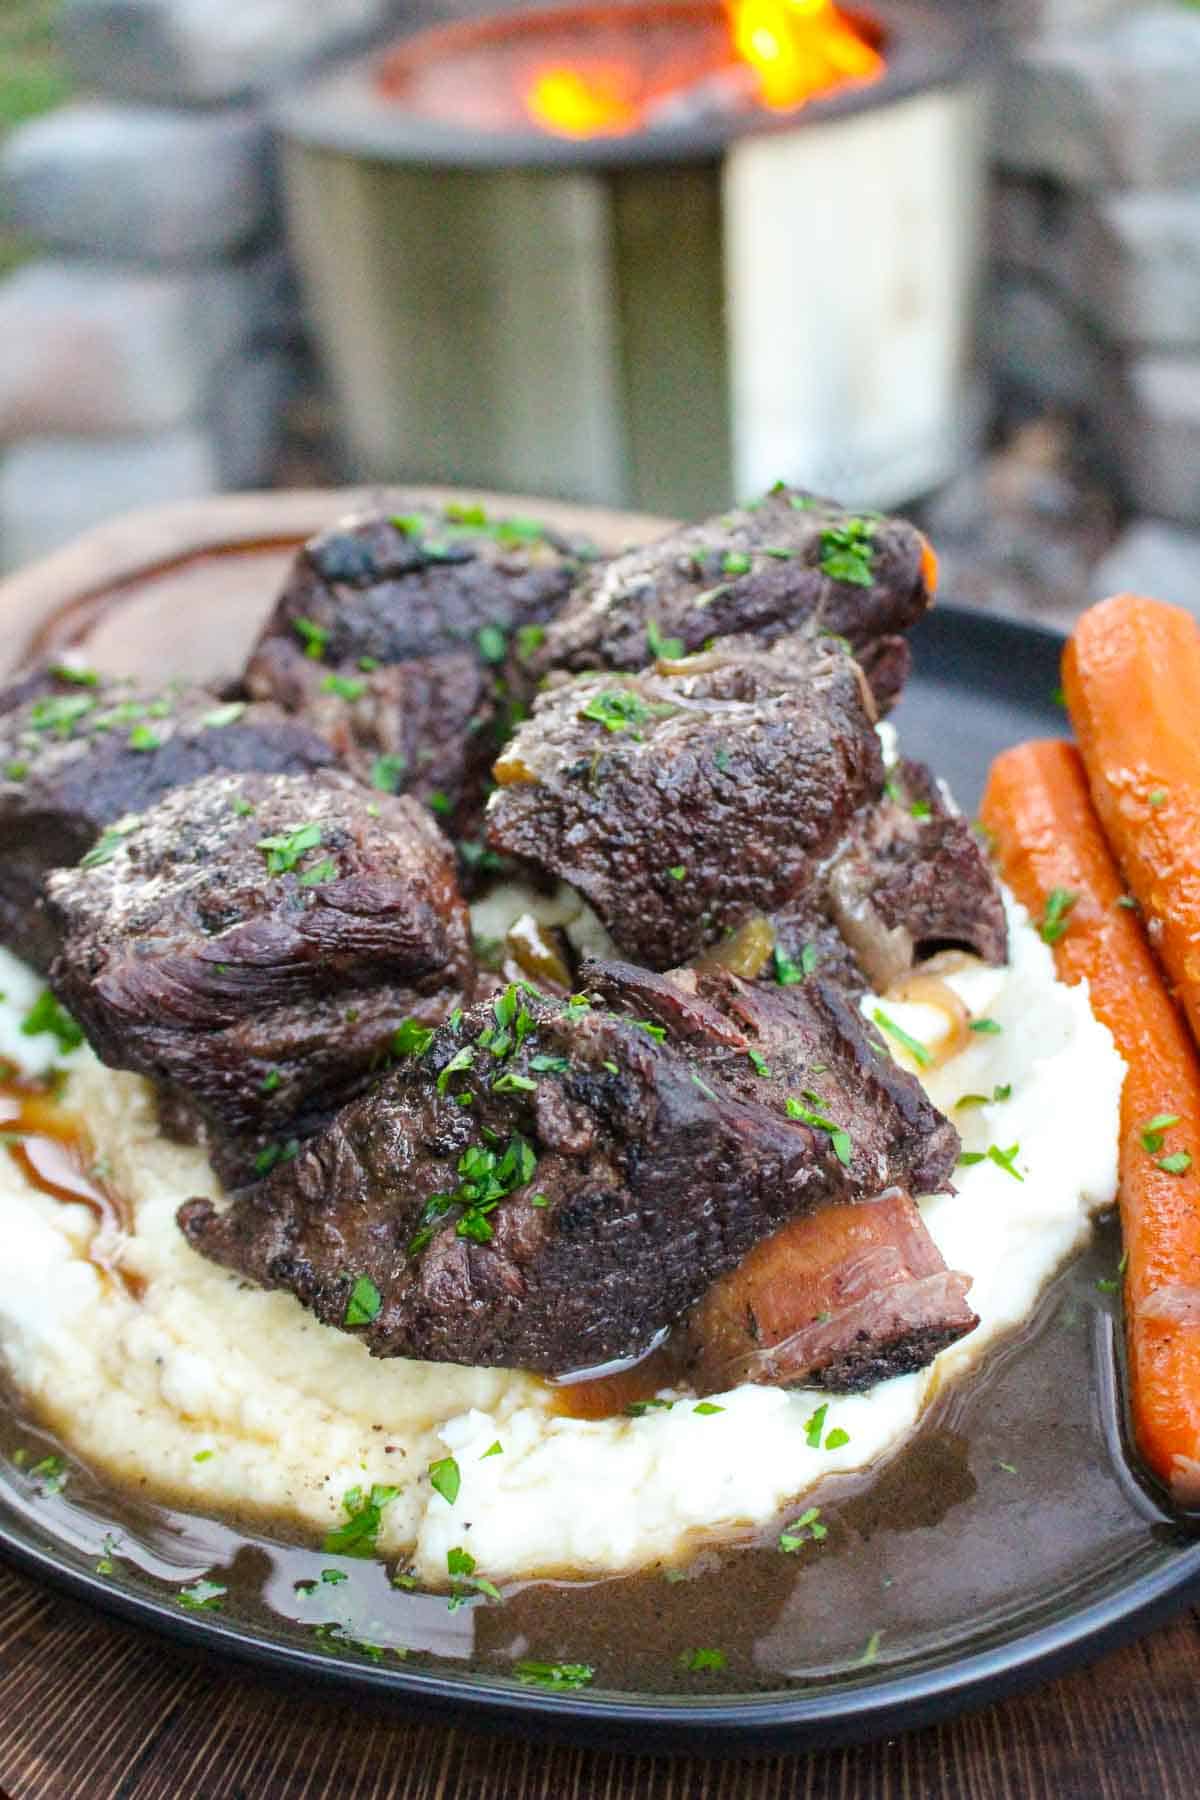 The cover image shows off the braised beef ribs, carrots, and mashed potatoes. 